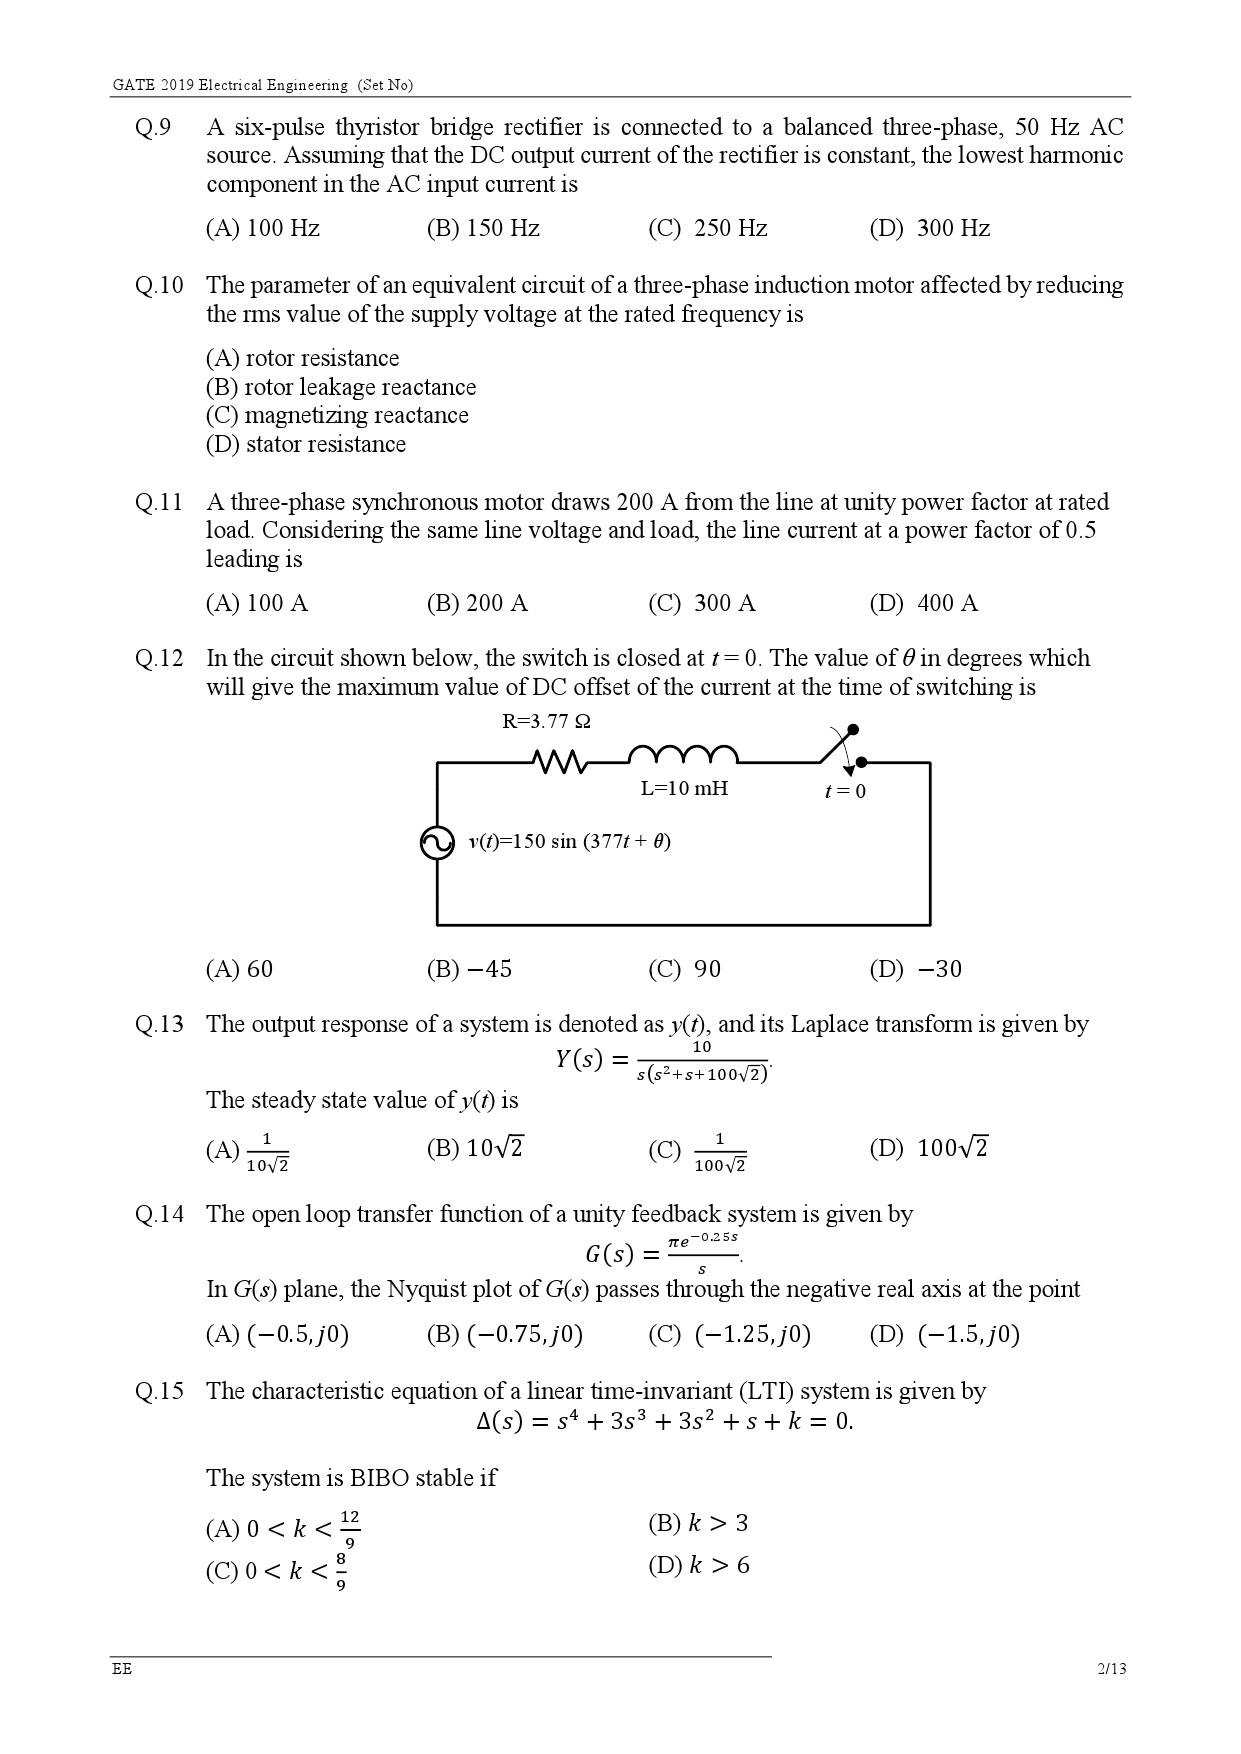 GATE Exam Question Paper 2019 Electrical Engineering 4